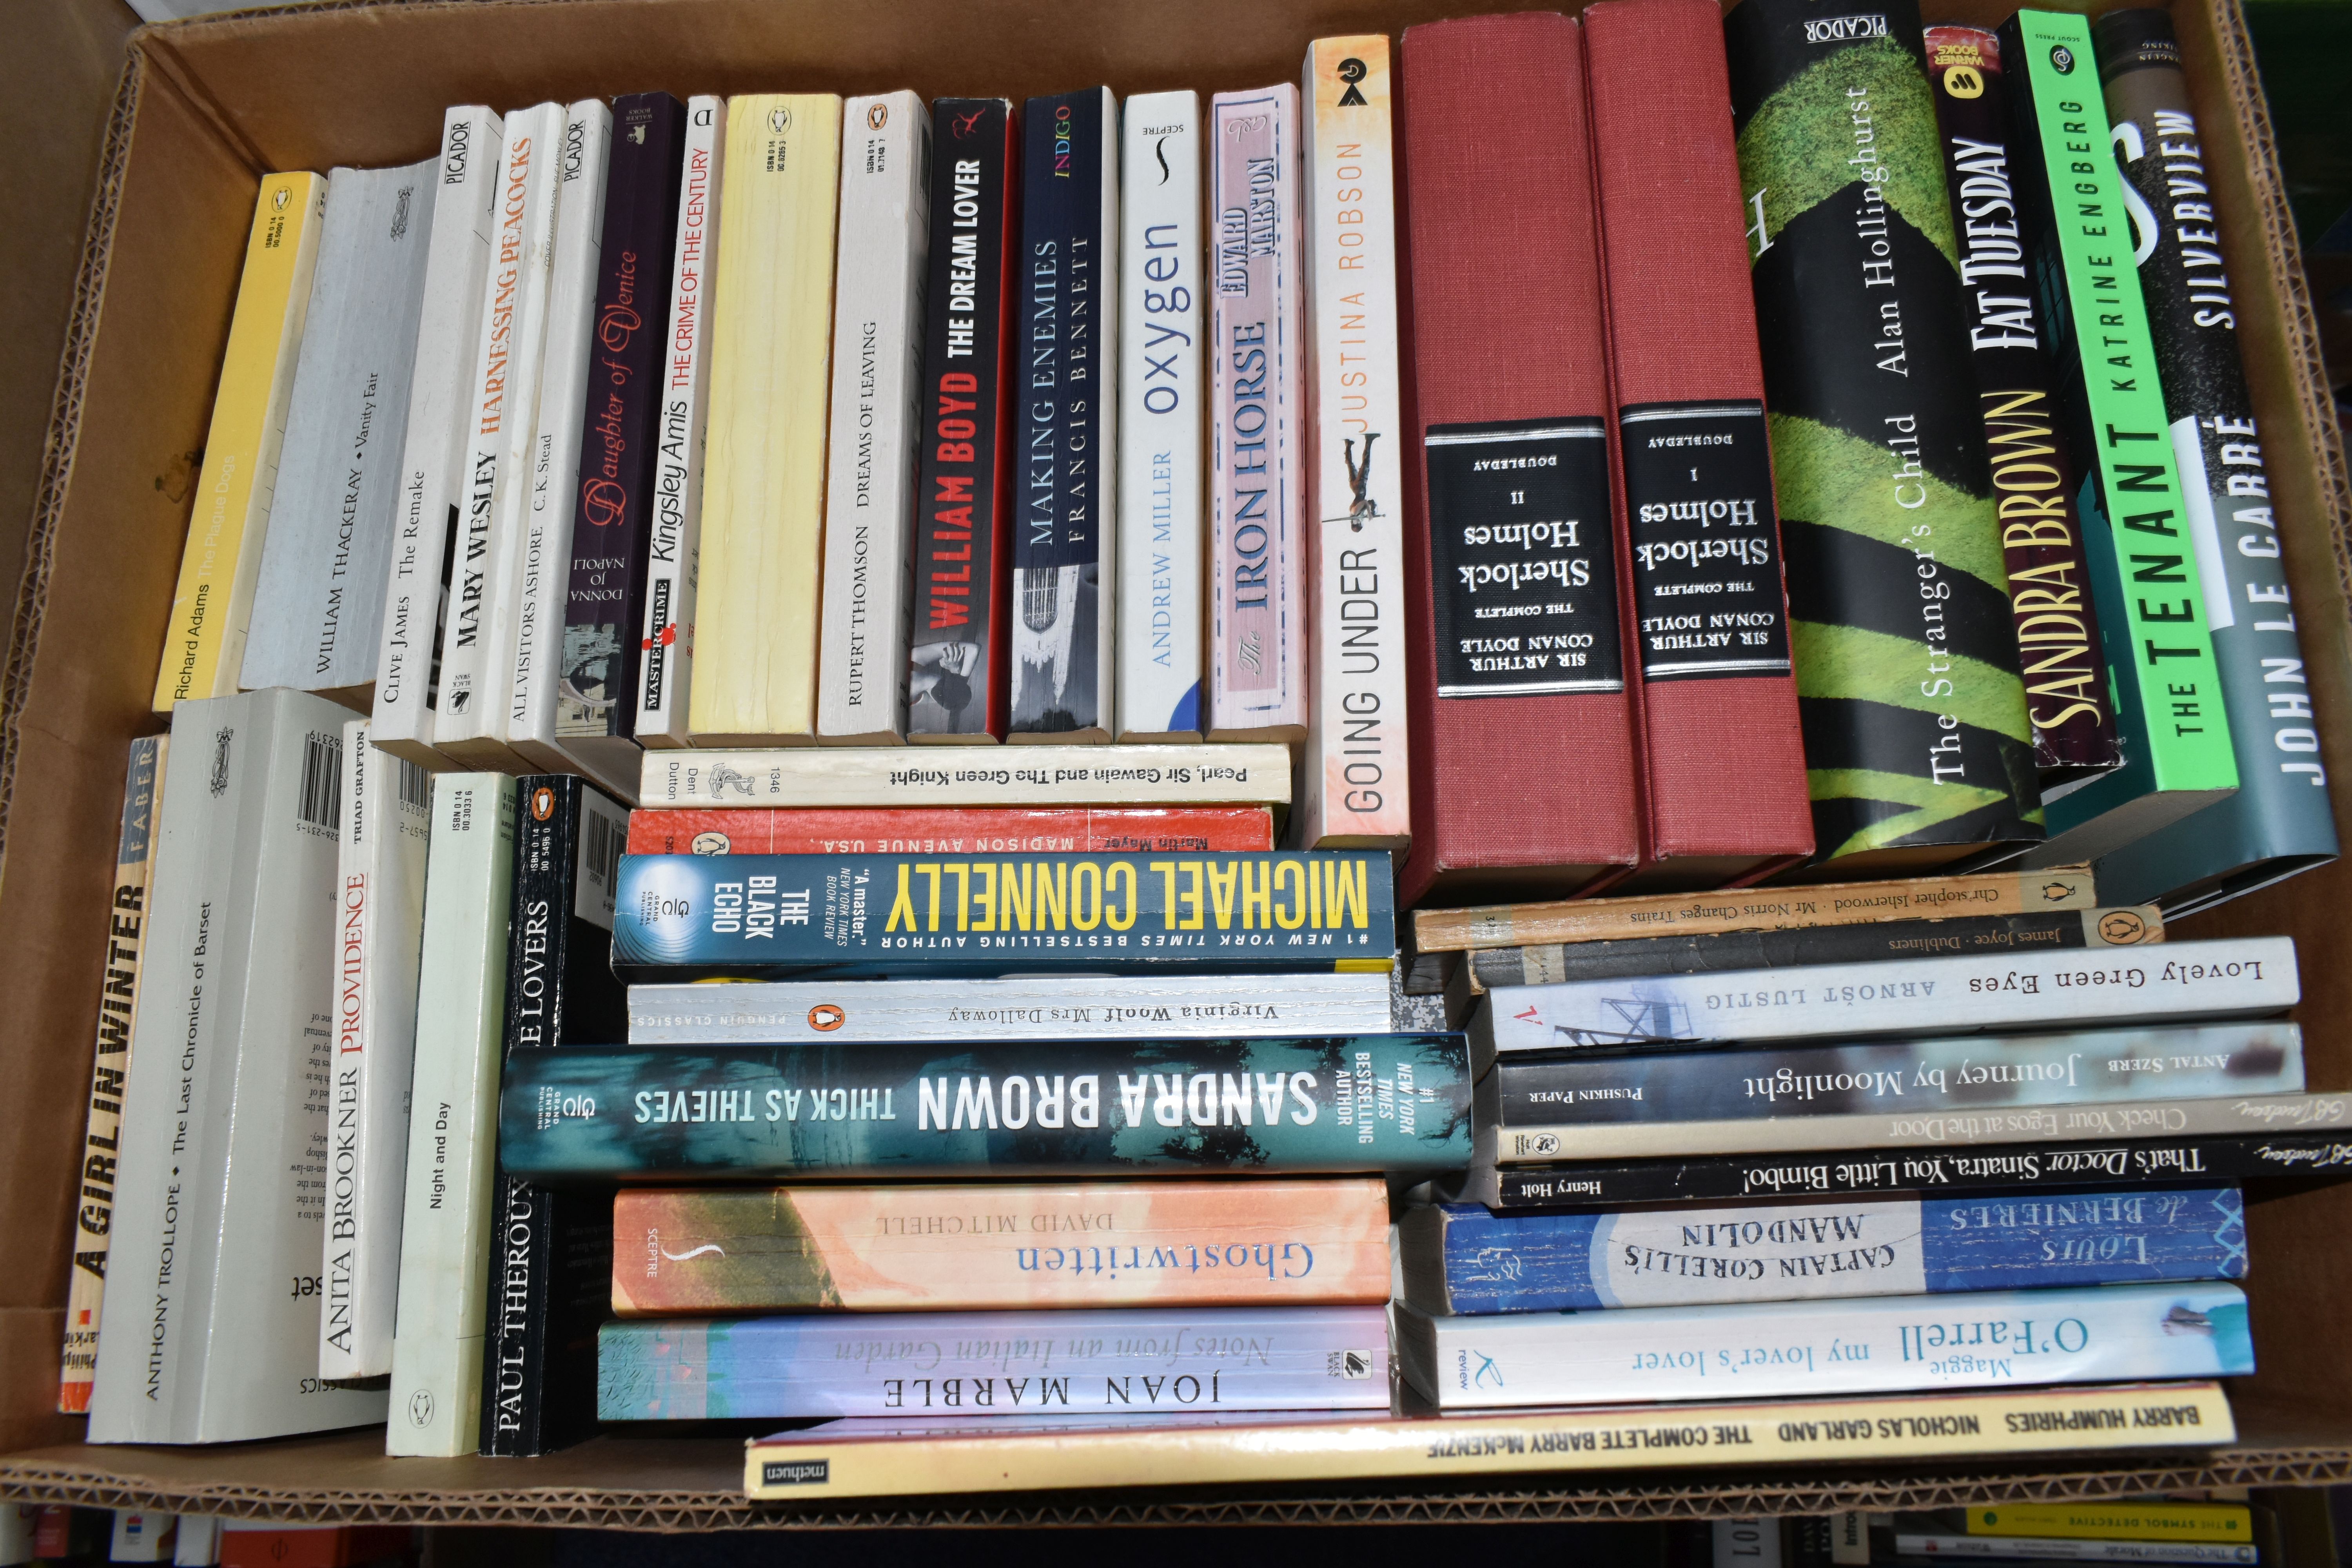 SIX BOXES OF BOOKS containing approximately 245 titles in hardback and paperback formats and - Image 2 of 7